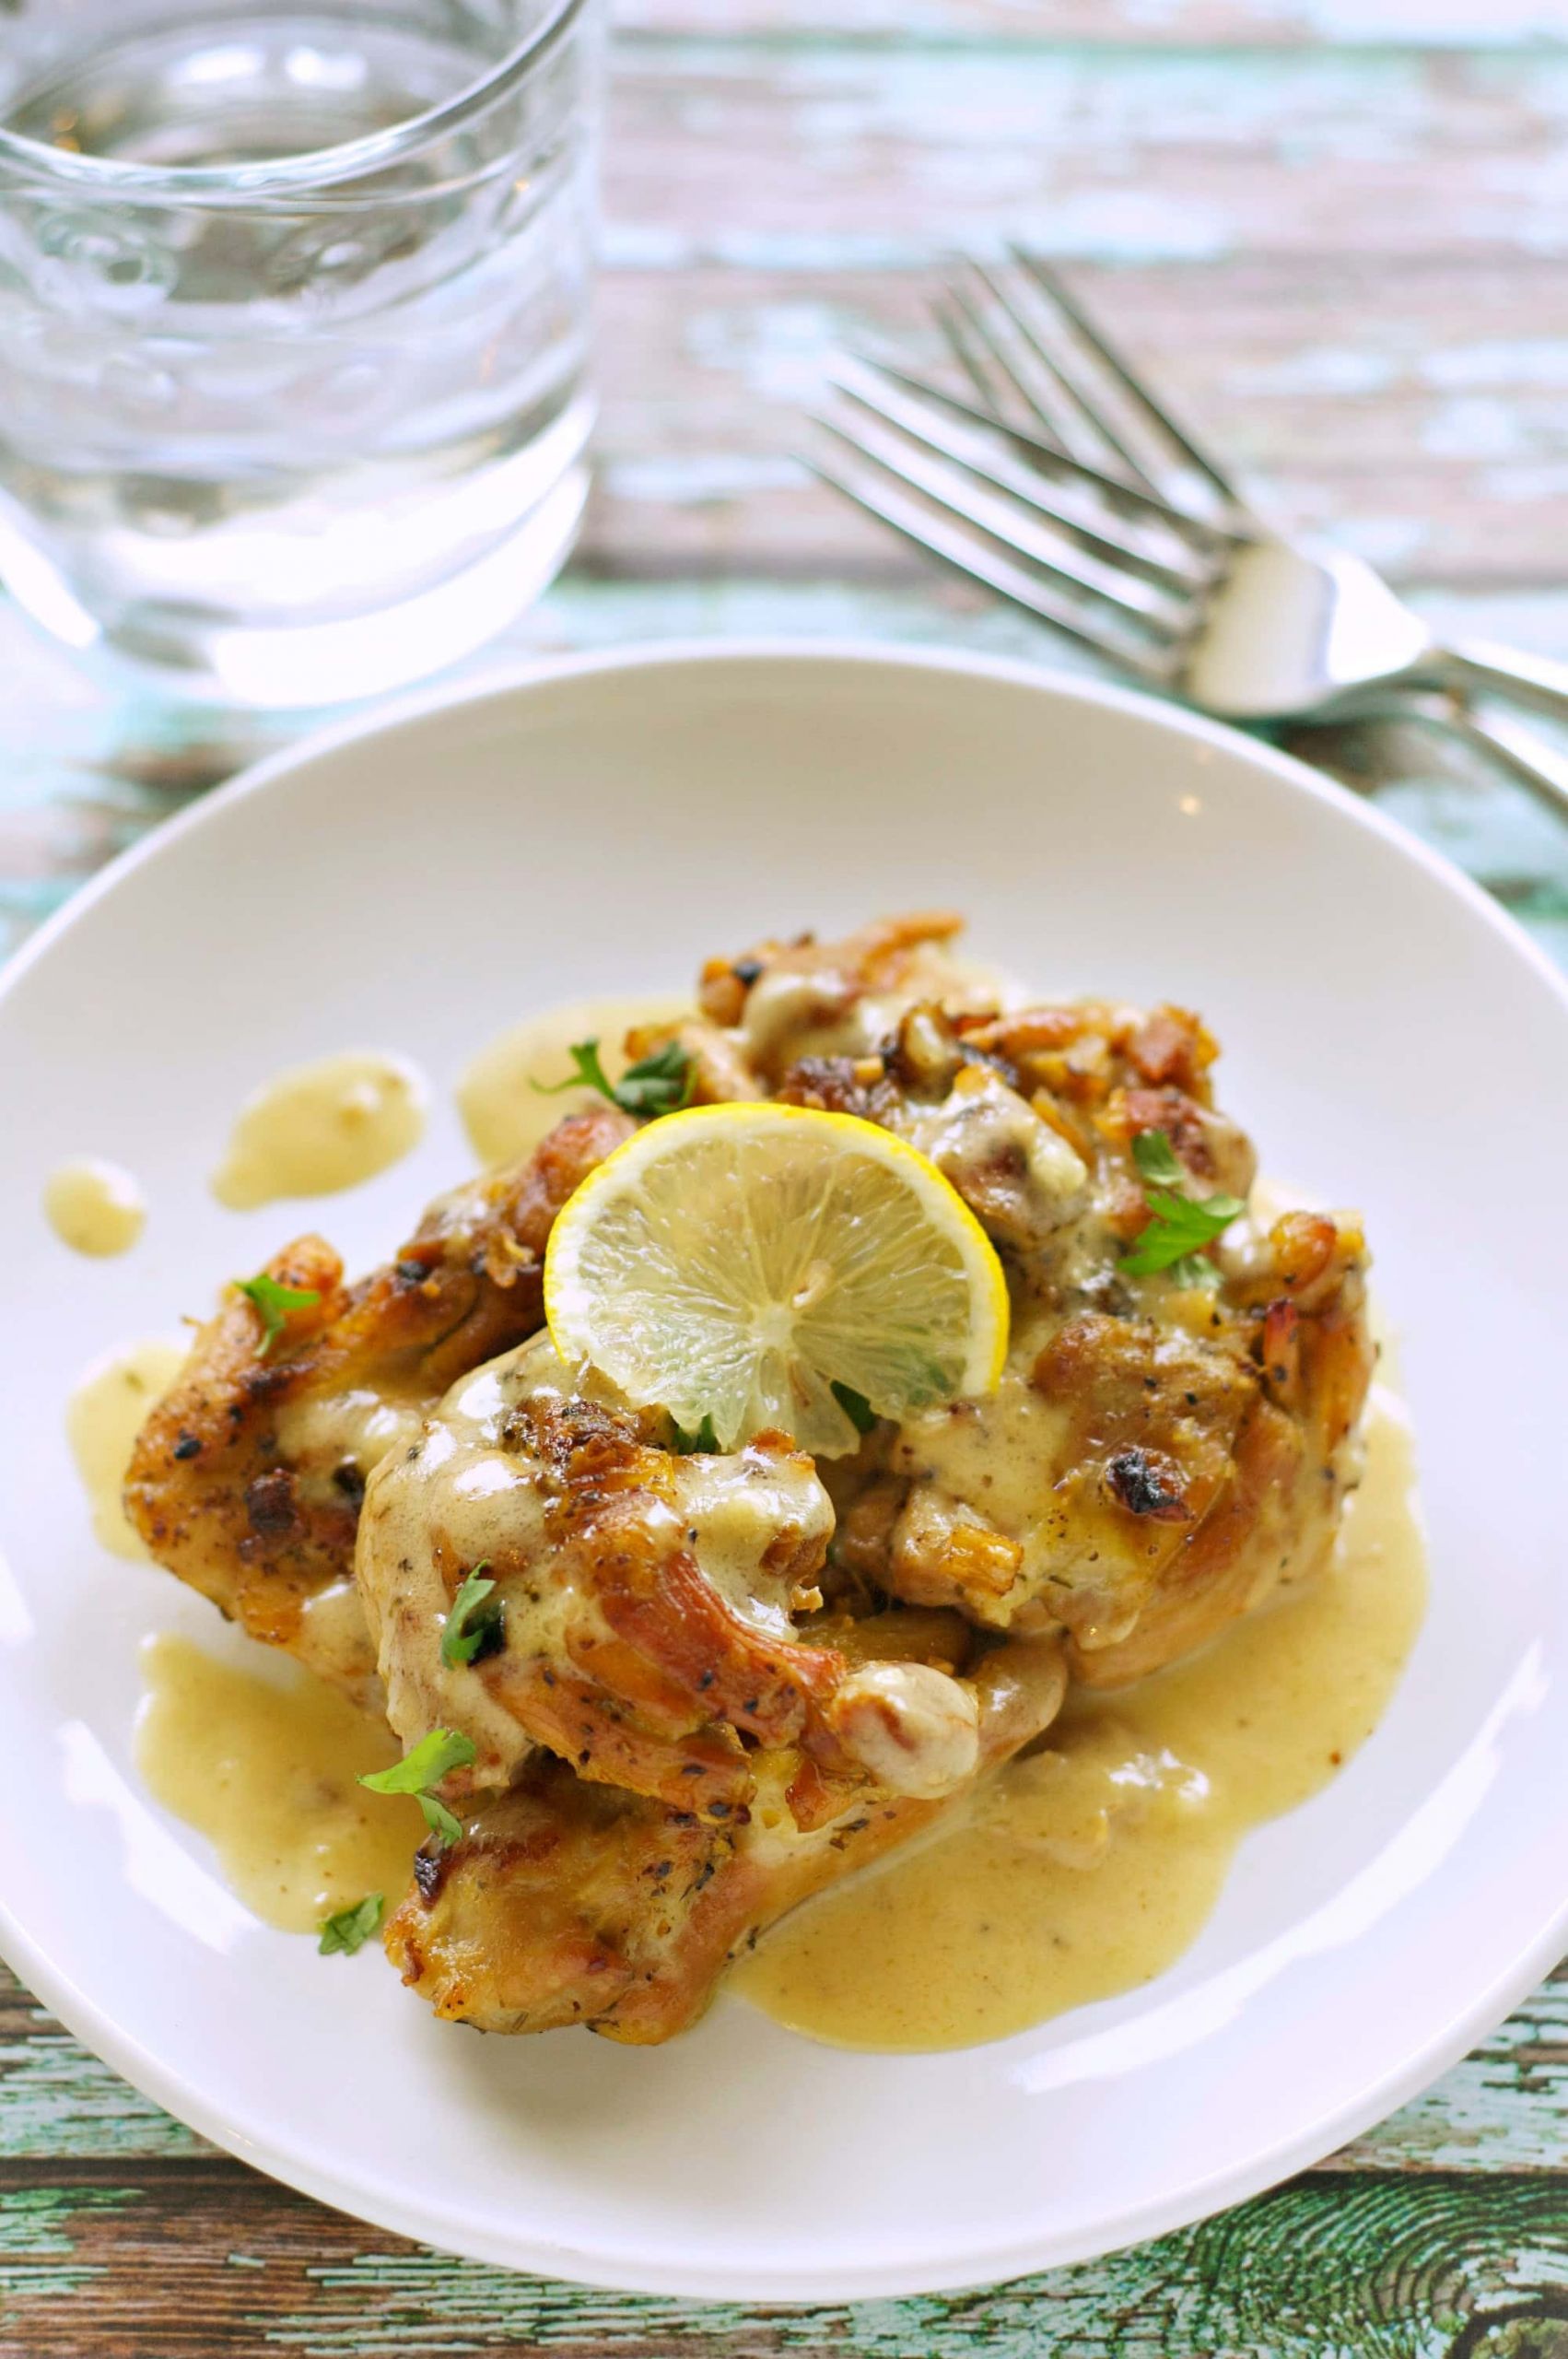 Chicken Thighs Slow Cooker Time On High
 Slow Cooker Chicken Thighs with Creamy Lemon Sauce Slow